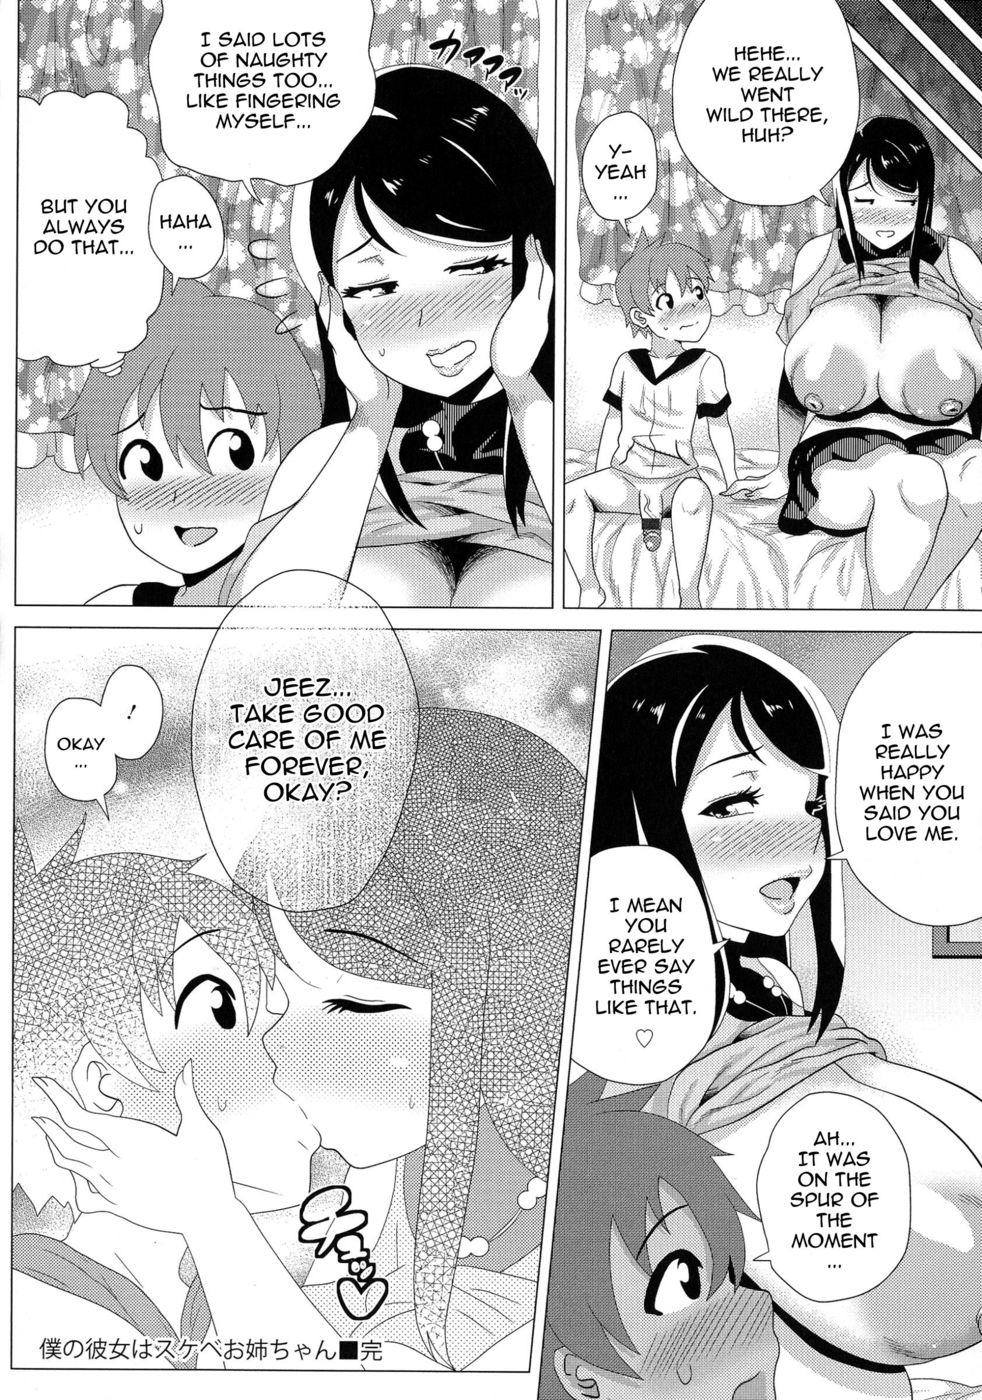 Cut My Honey is PERVERTED-ONEECHAN Tattoo - Page 20